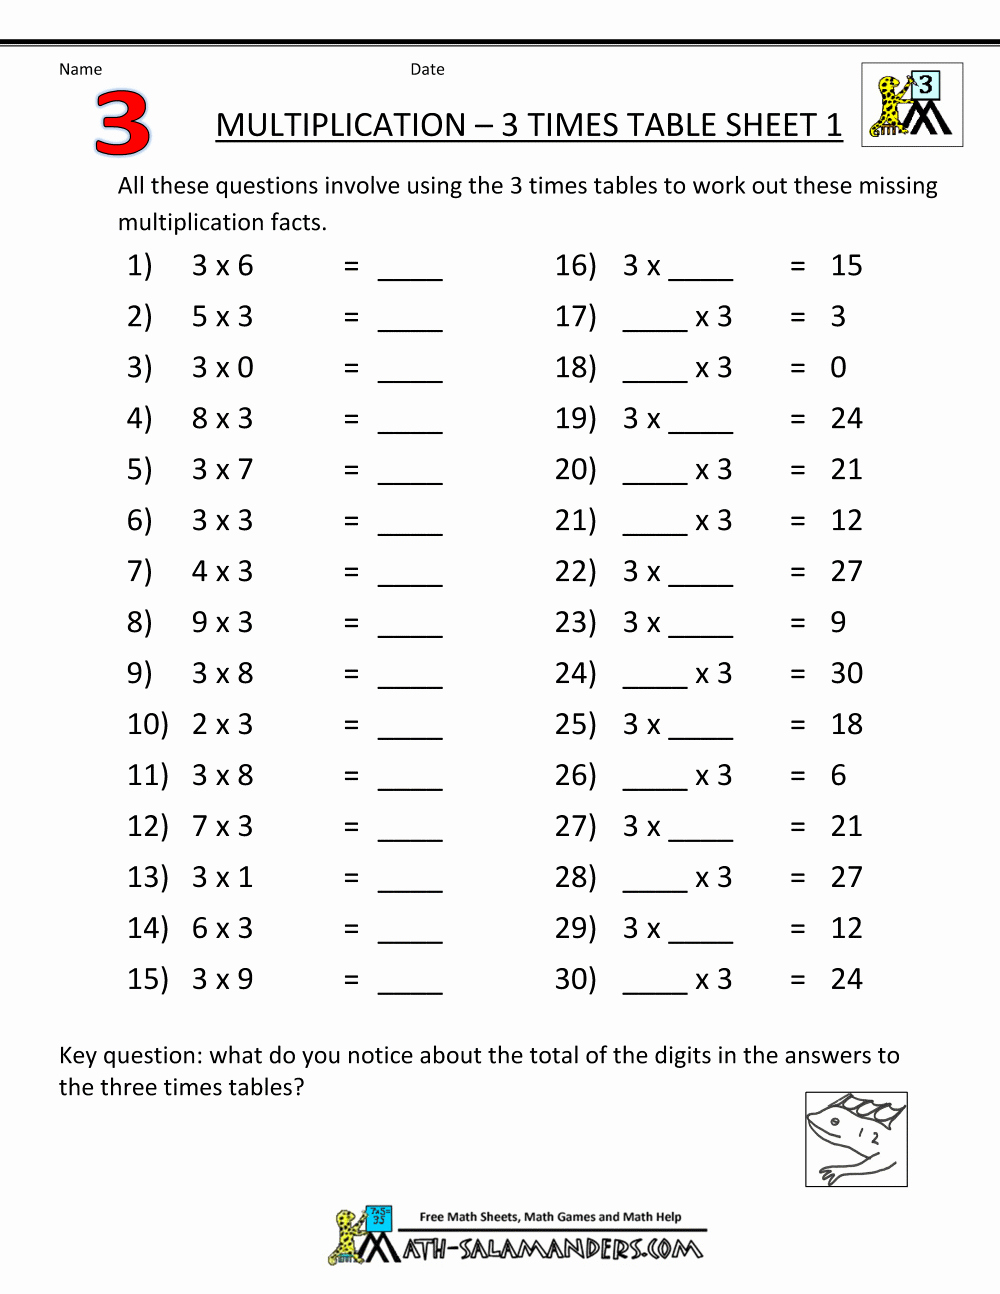 3 Times Table Worksheet Best Of Multiplication Fact Sheets 3 Times Table 1